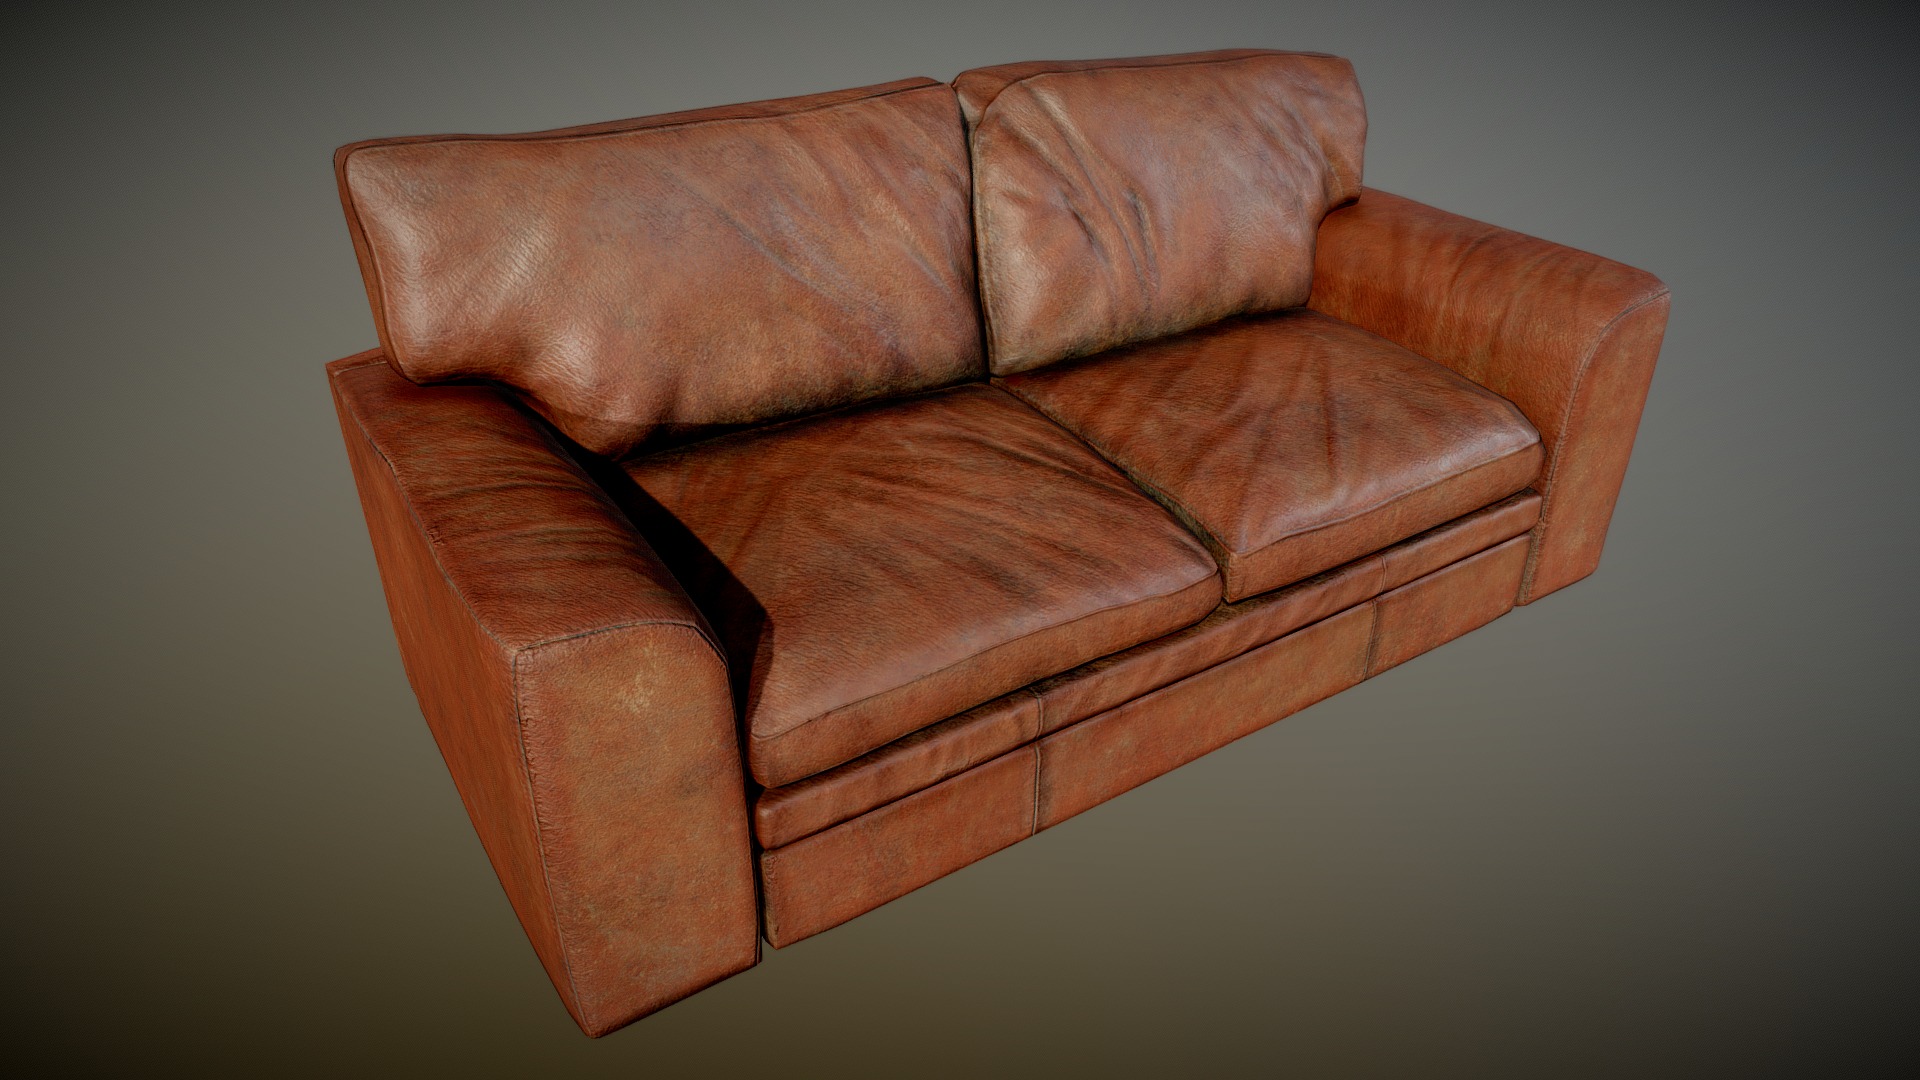 3D model Old Dirty Leather Couch Cinnamon – PBR - This is a 3D model of the Old Dirty Leather Couch Cinnamon - PBR. The 3D model is about a brown leather couch.